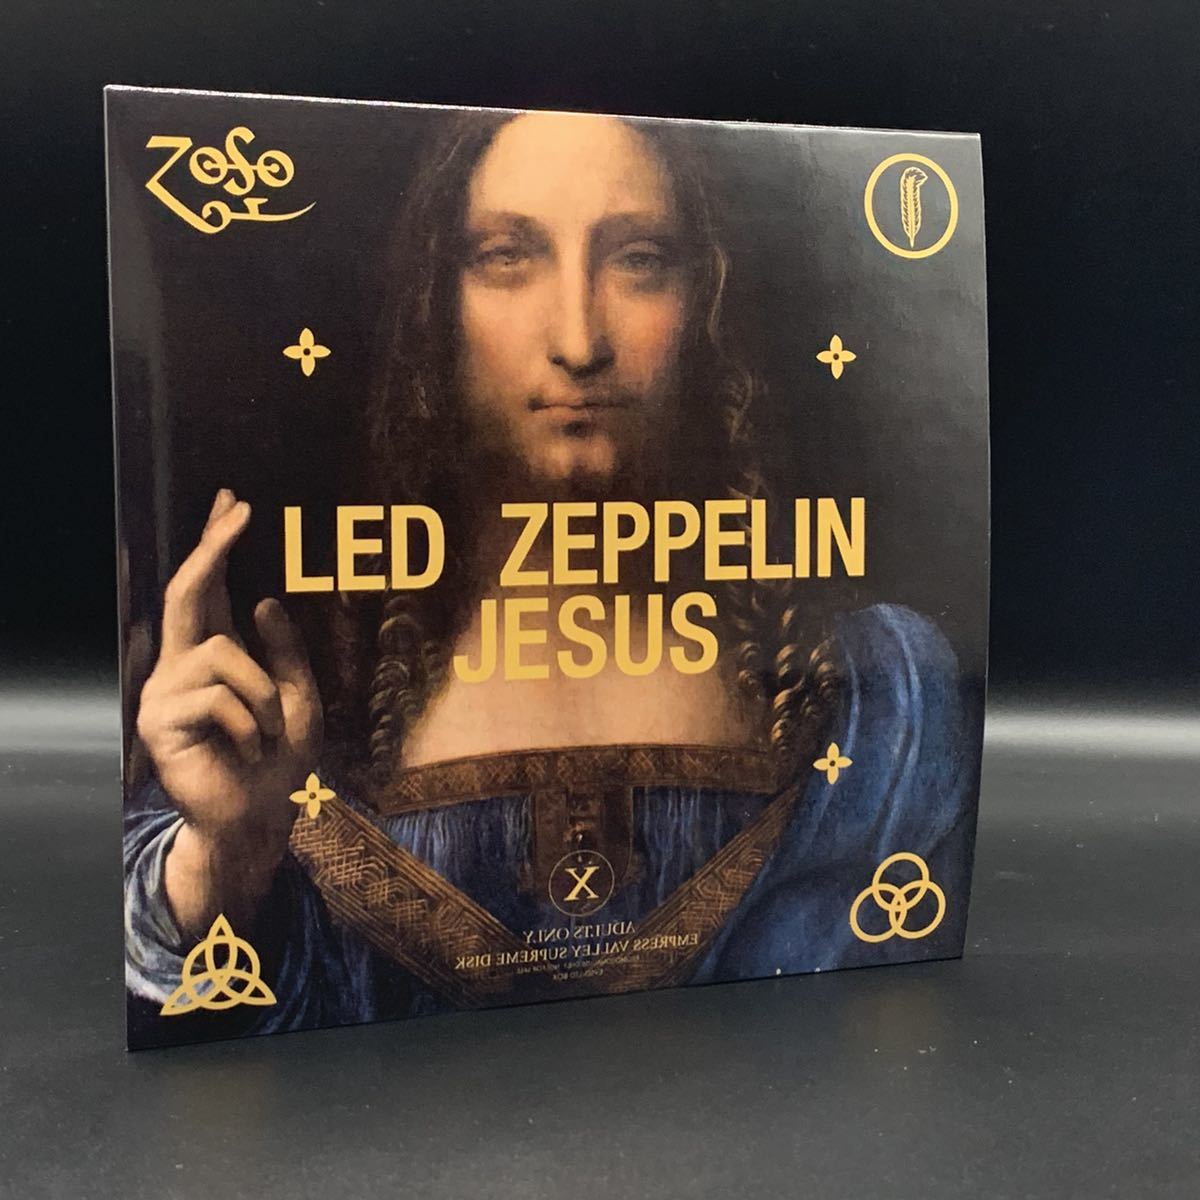 LED ZEPPELIN : JESUS 「ジュデアのジェズス」 2CD 工場プレス銀盤CD 1970 MONTREUX 限定盤！の画像3